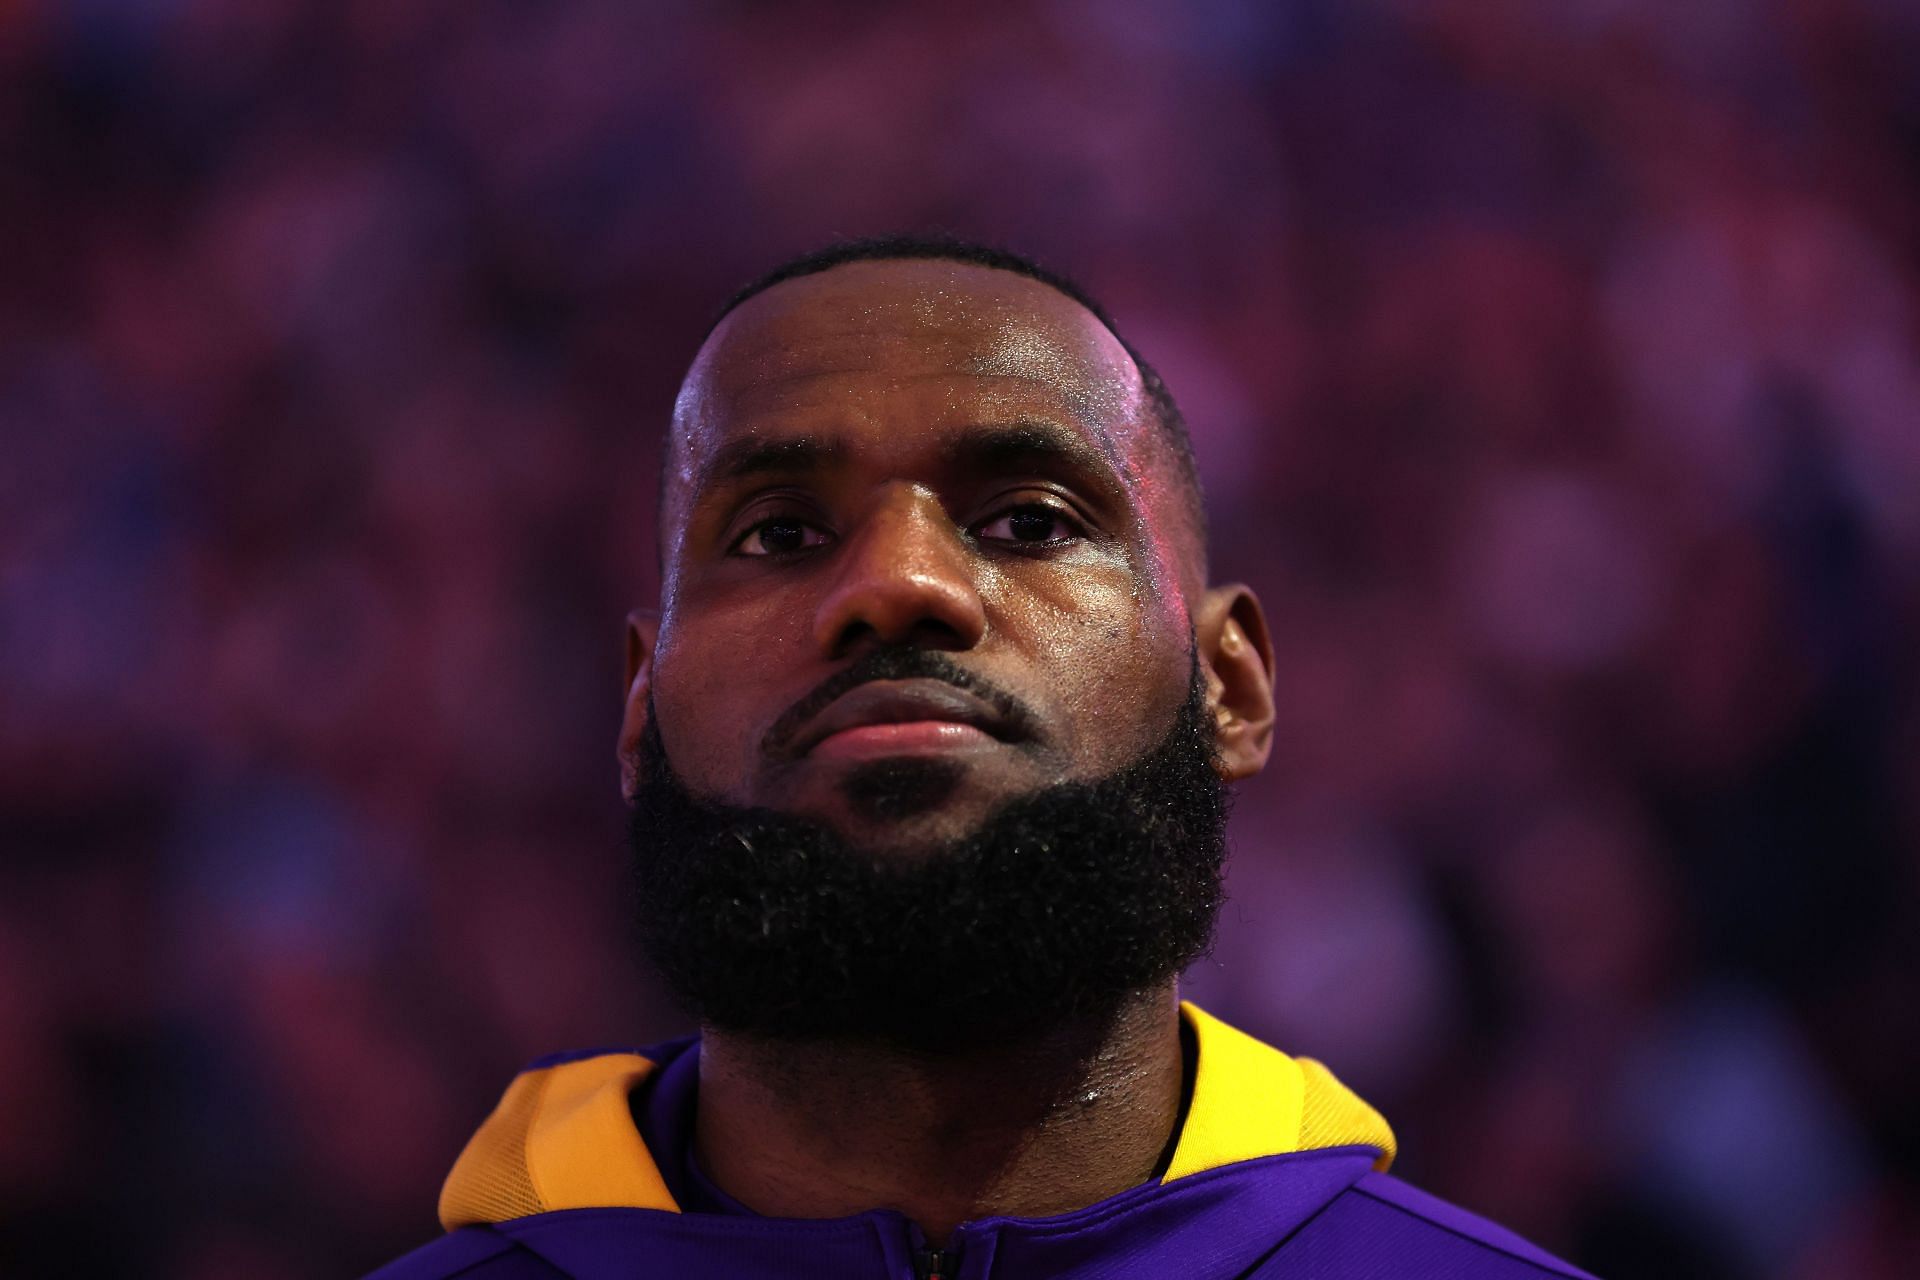 lebron-james-lying-meme-tracing-twitter-s-investigation-into-calling